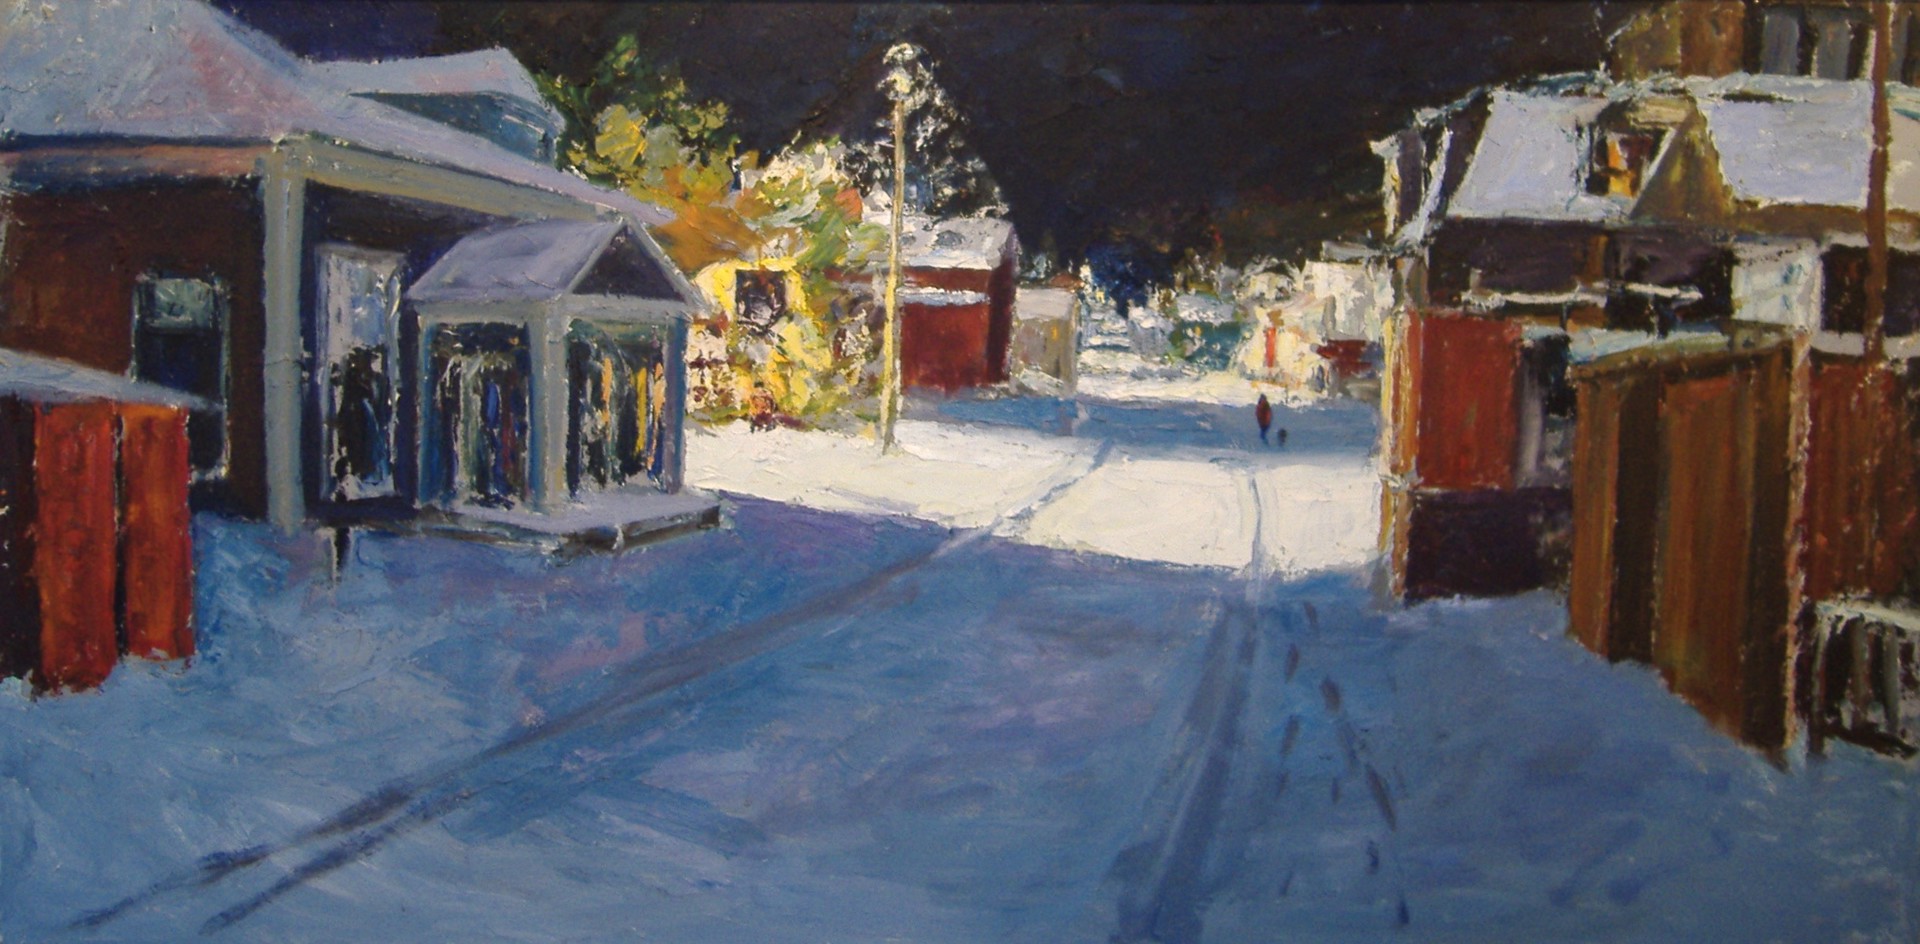 Closed for the Season by Nancy Whorf